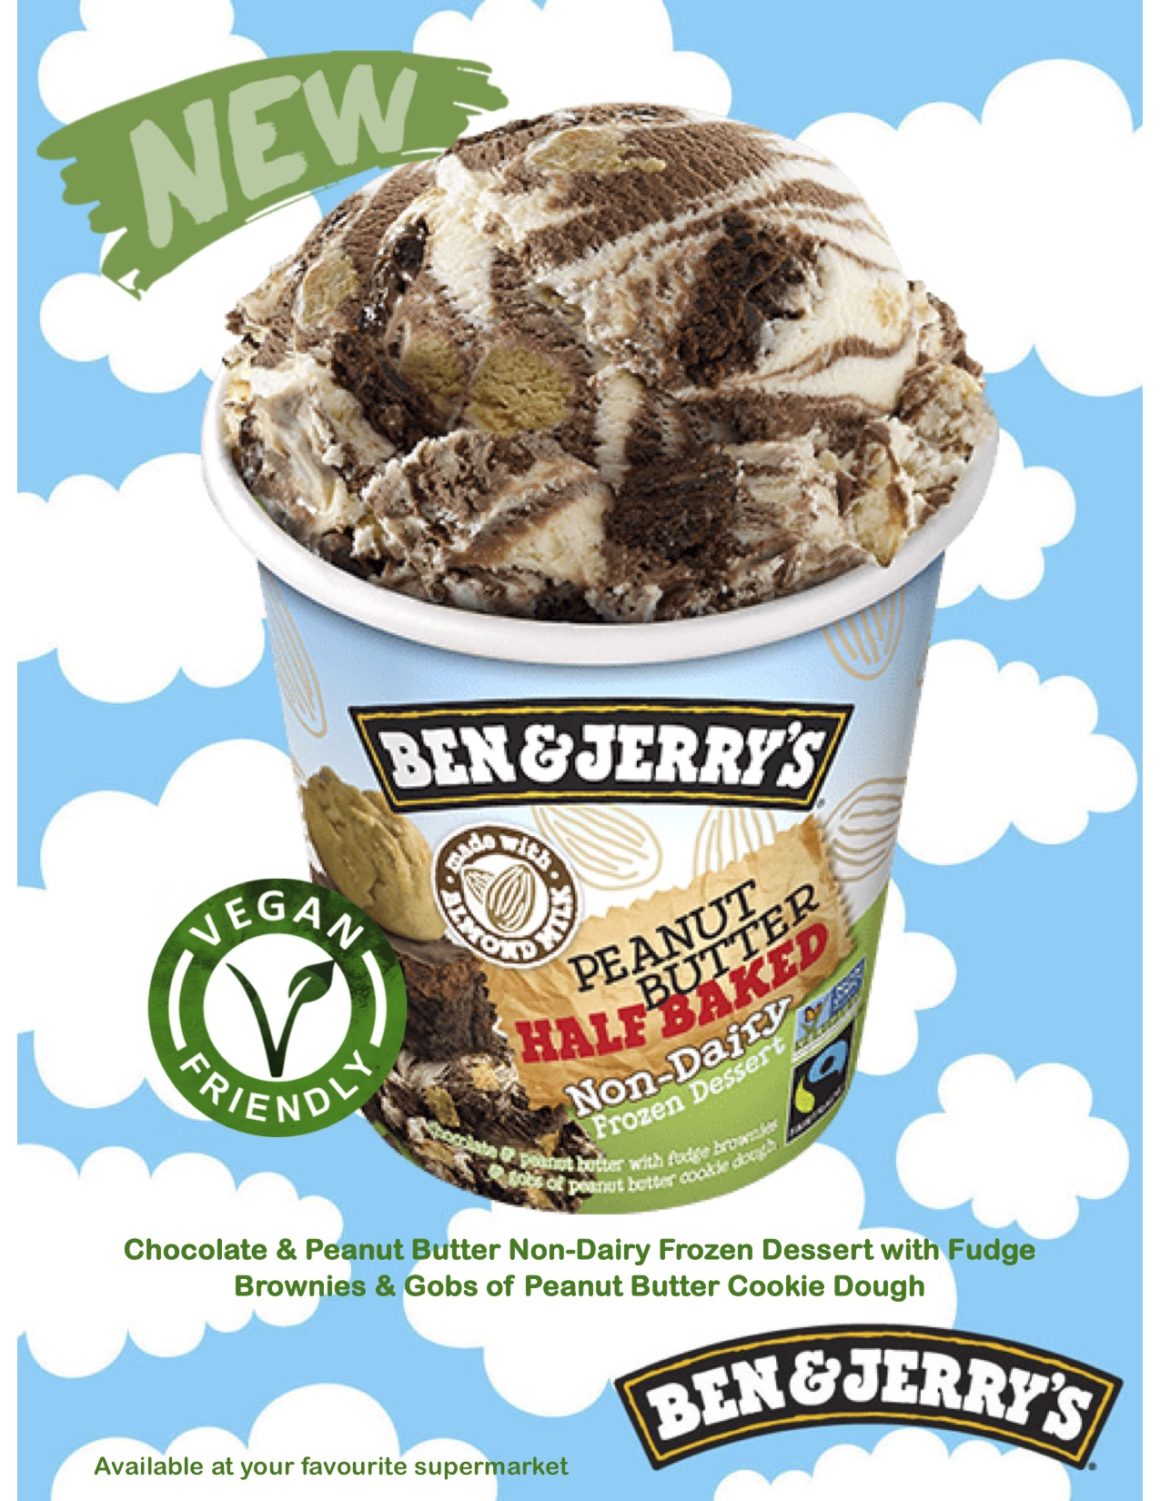 New…from Ben & Jerry’s